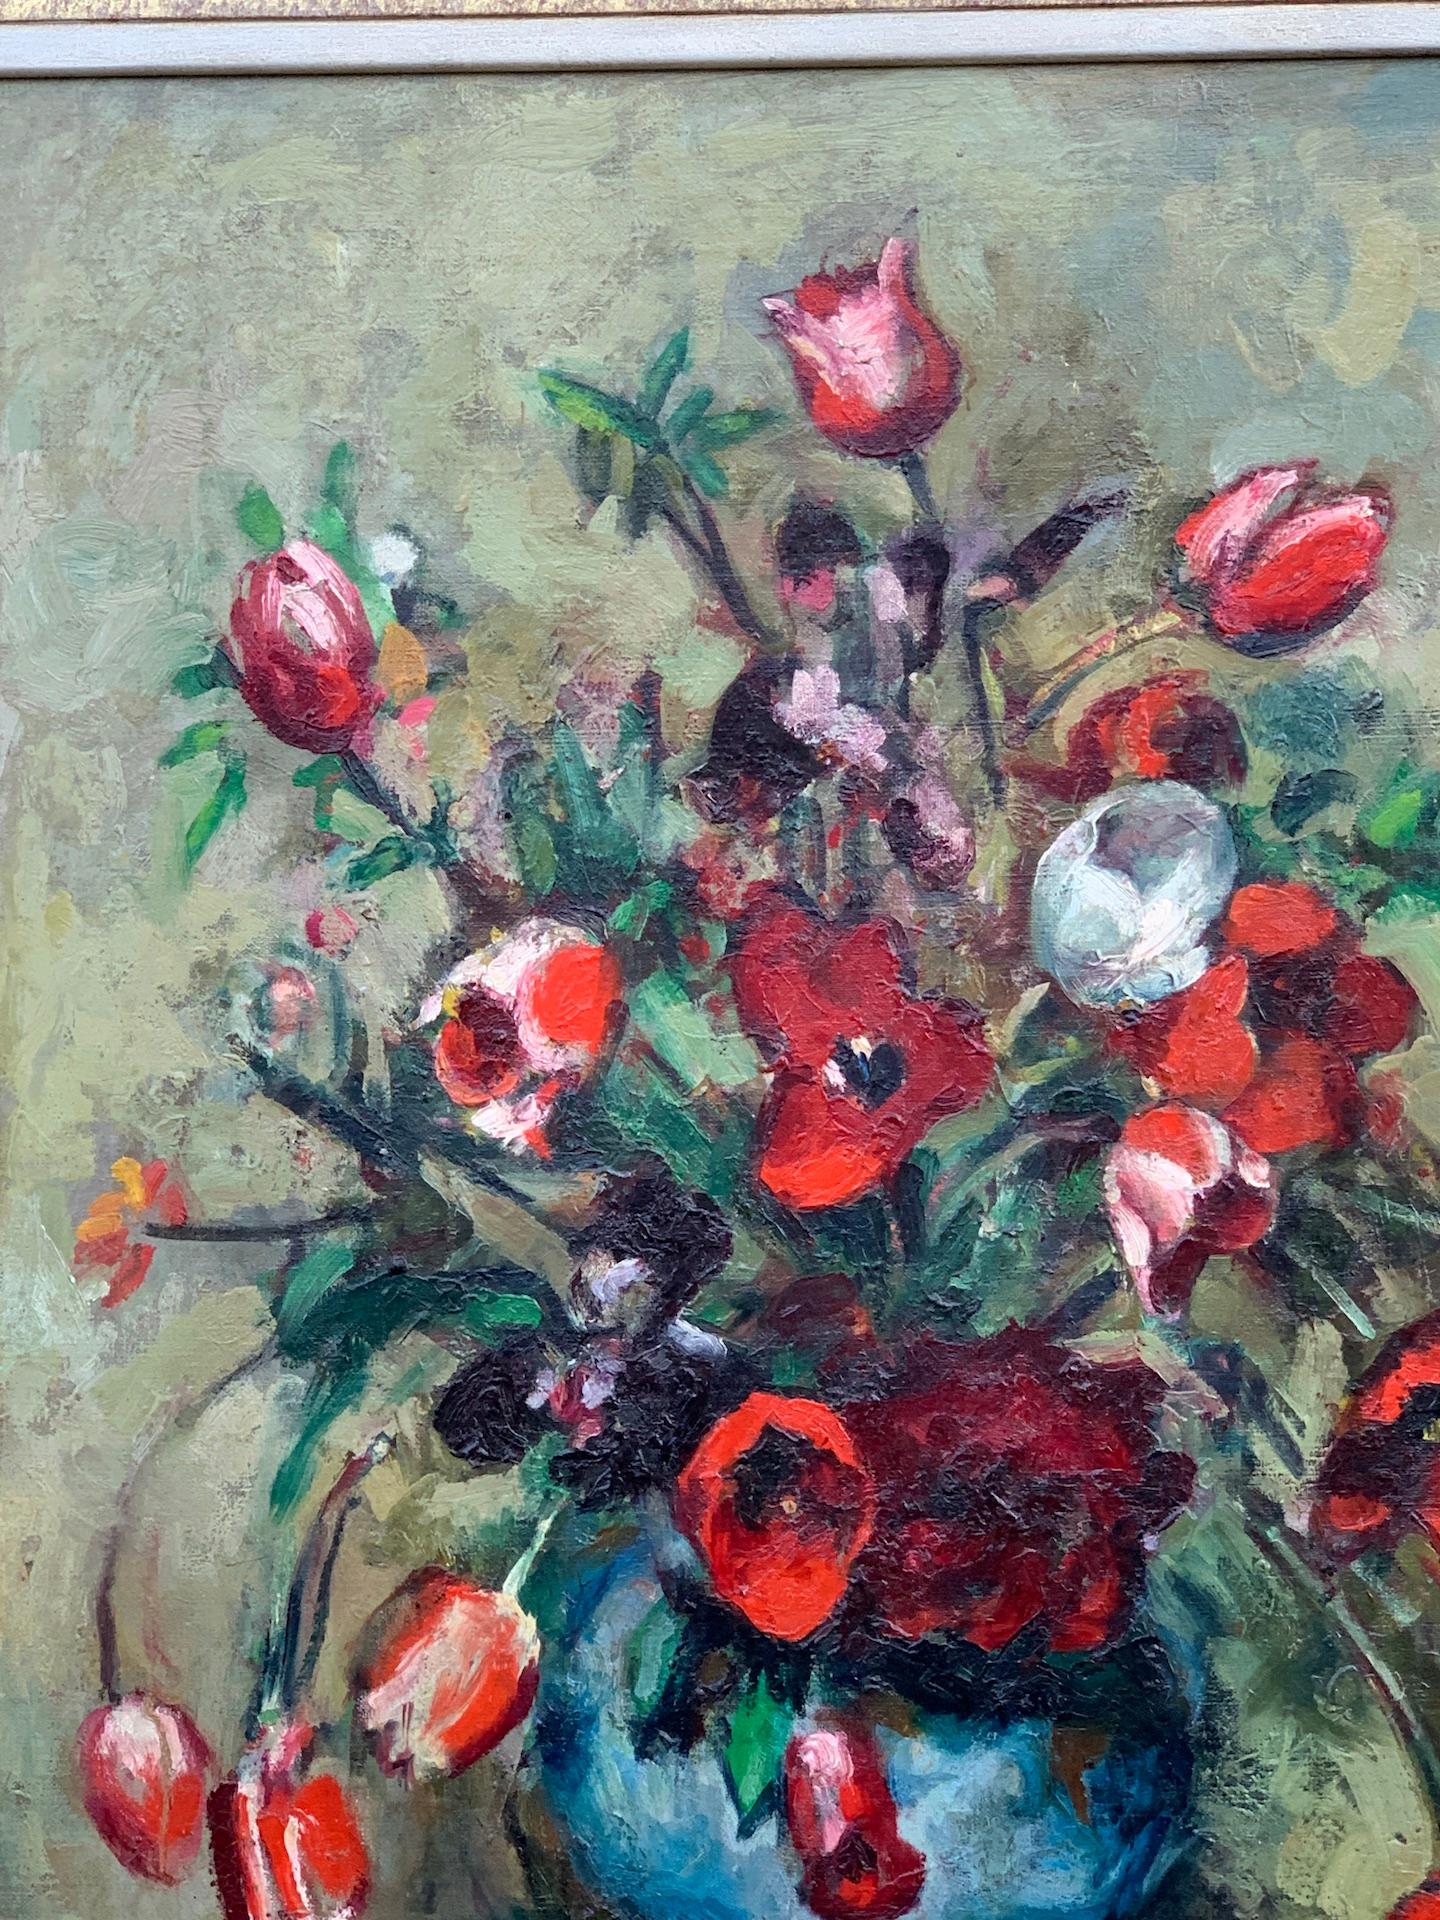 1930's English still life of Tulips and other red flowers in a vase  - Painting by M.Mathers